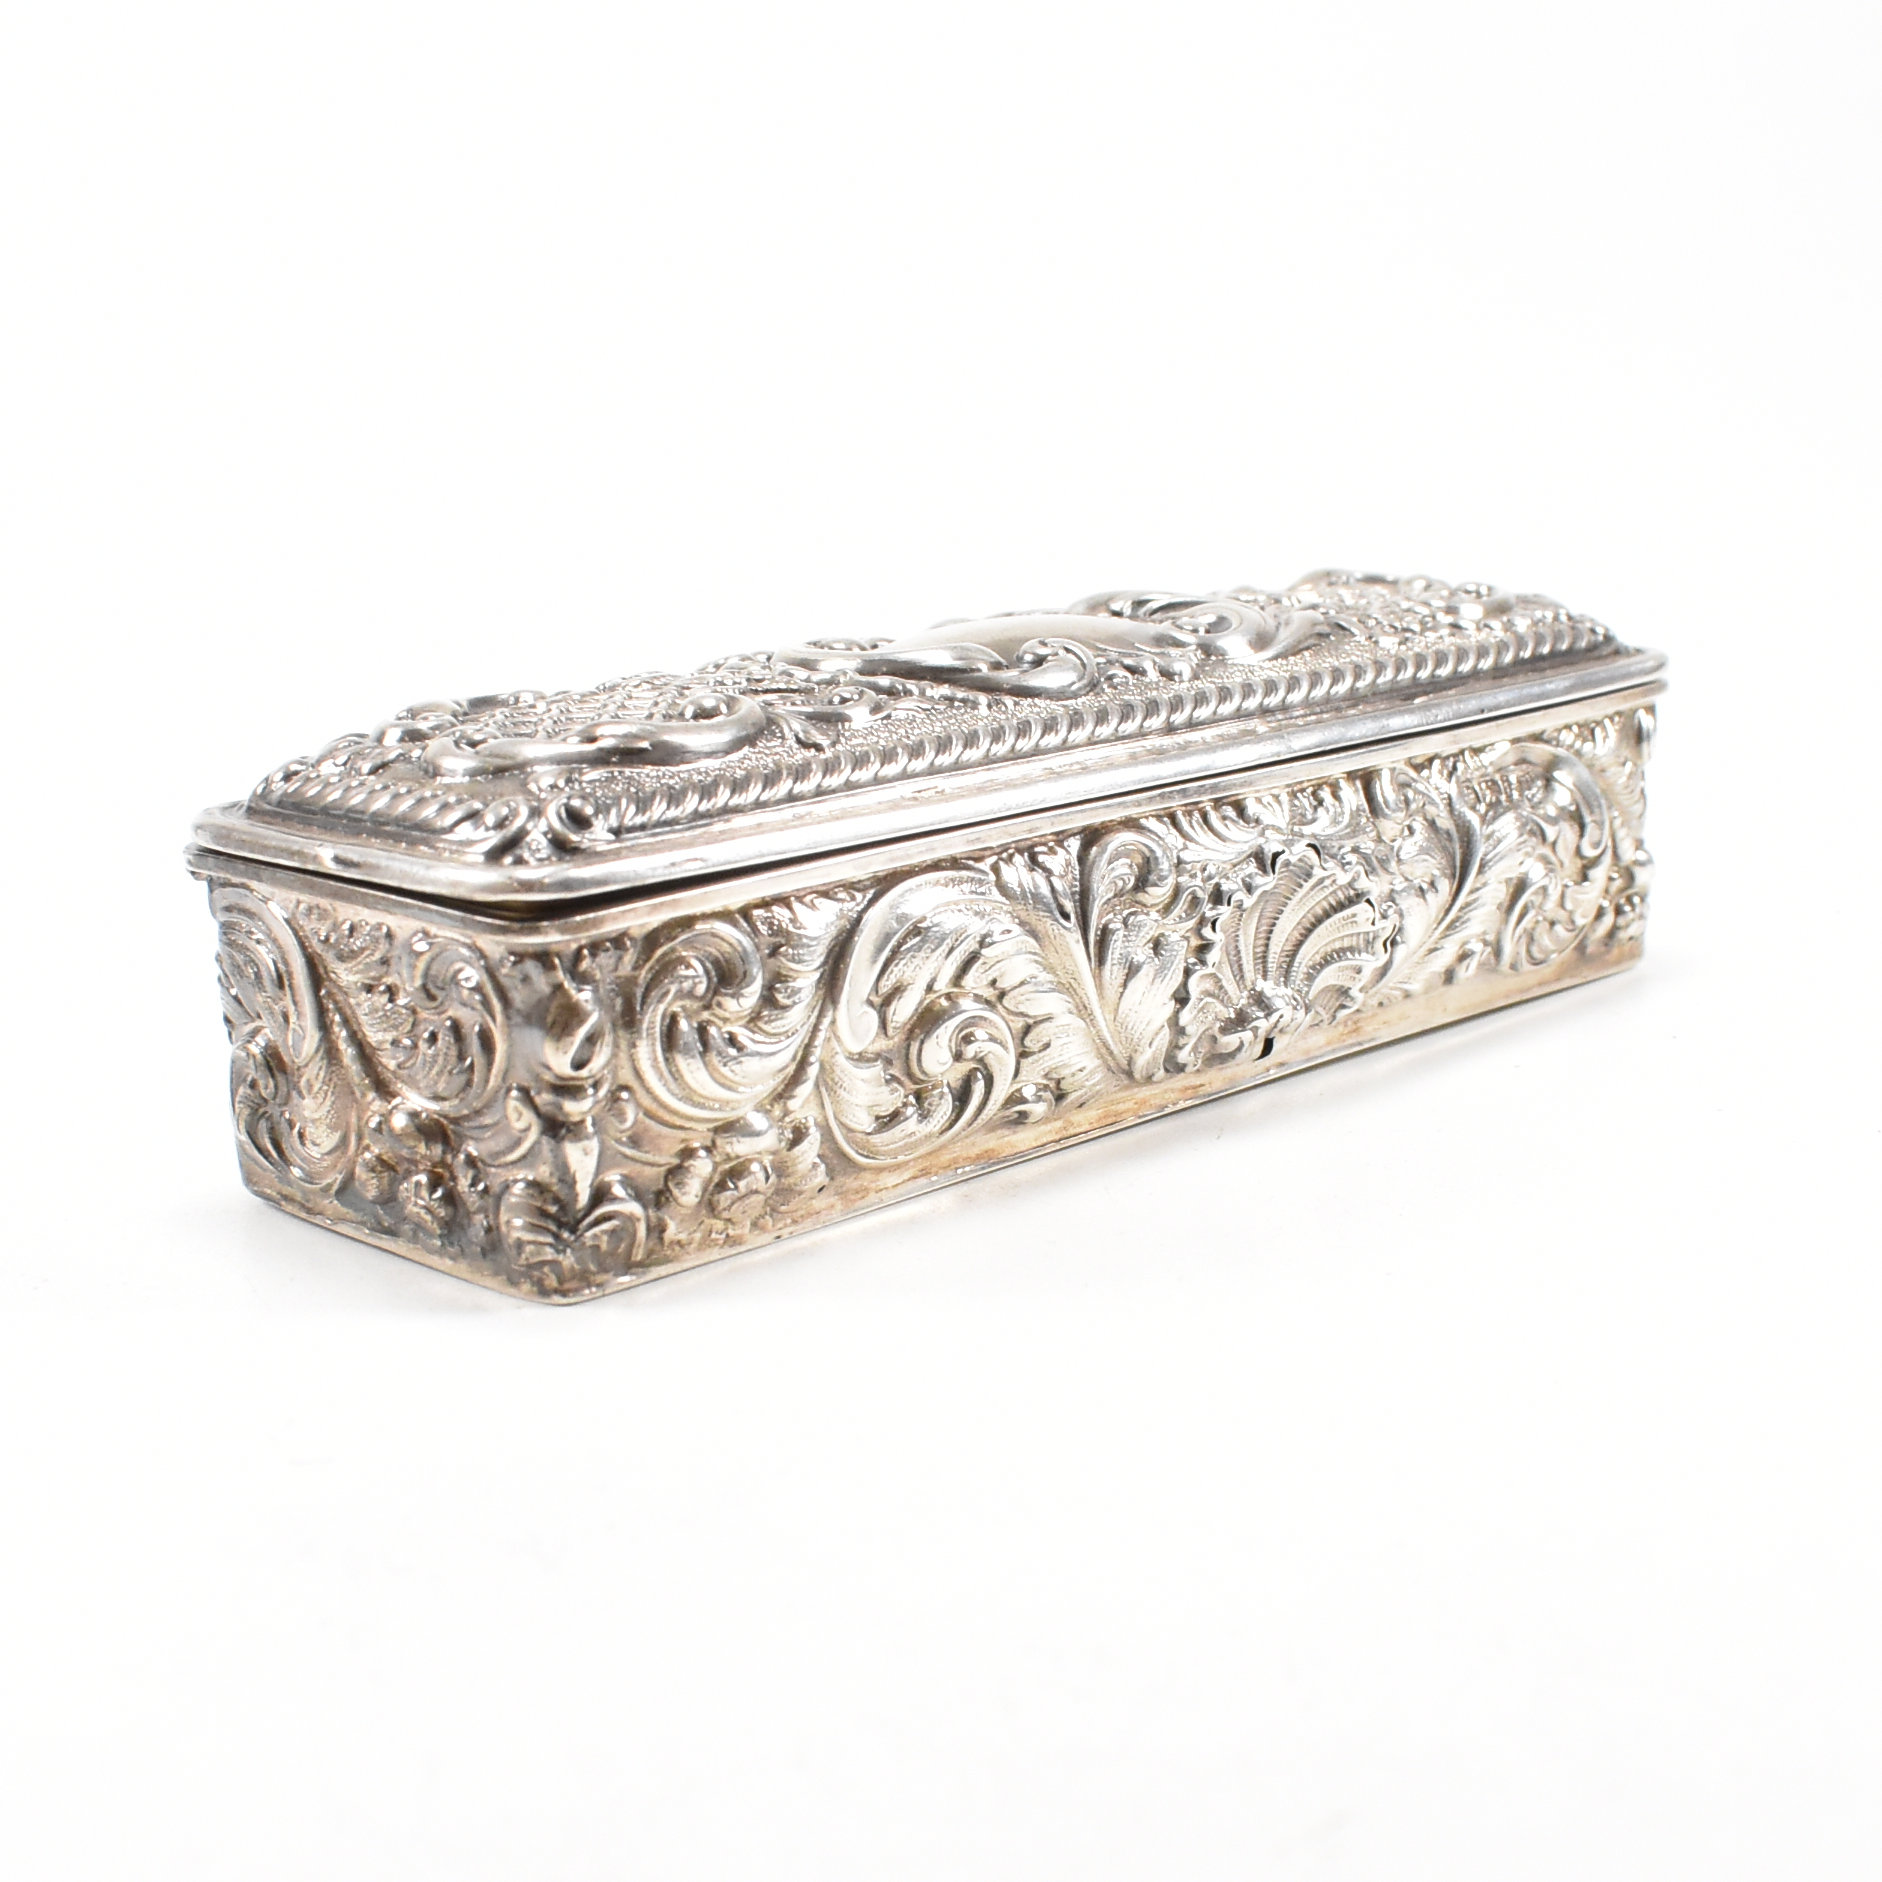 VICTORIAN HALLMARKED SILVER BOX BY WALKER & HALL - Image 2 of 9